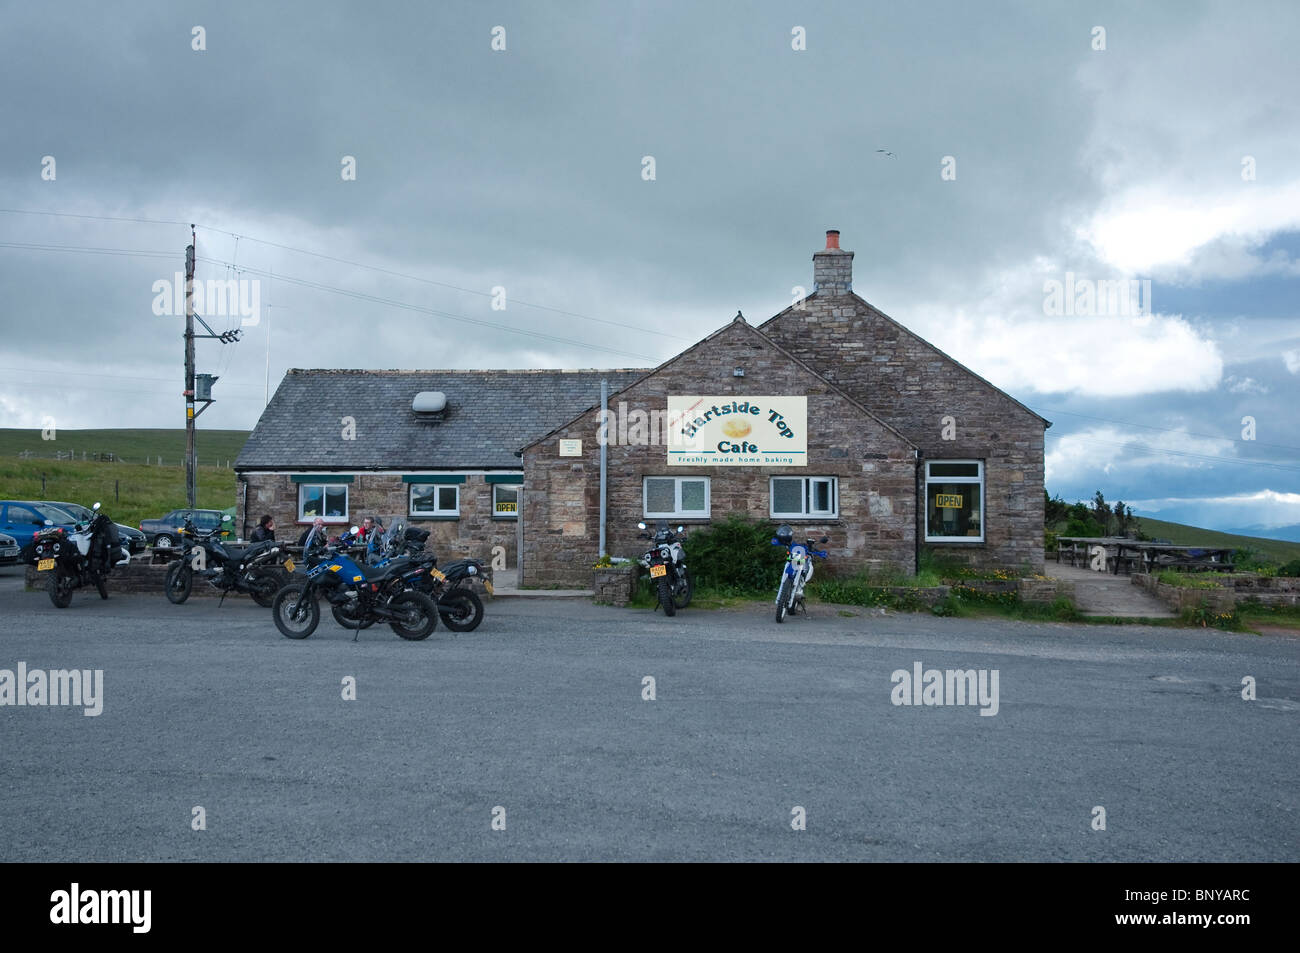 Hartside Top Cafe, Cumbria, - a good place to stop following the steep ascent from Penrith via the scenic A686 road. England, UK Stock Photo